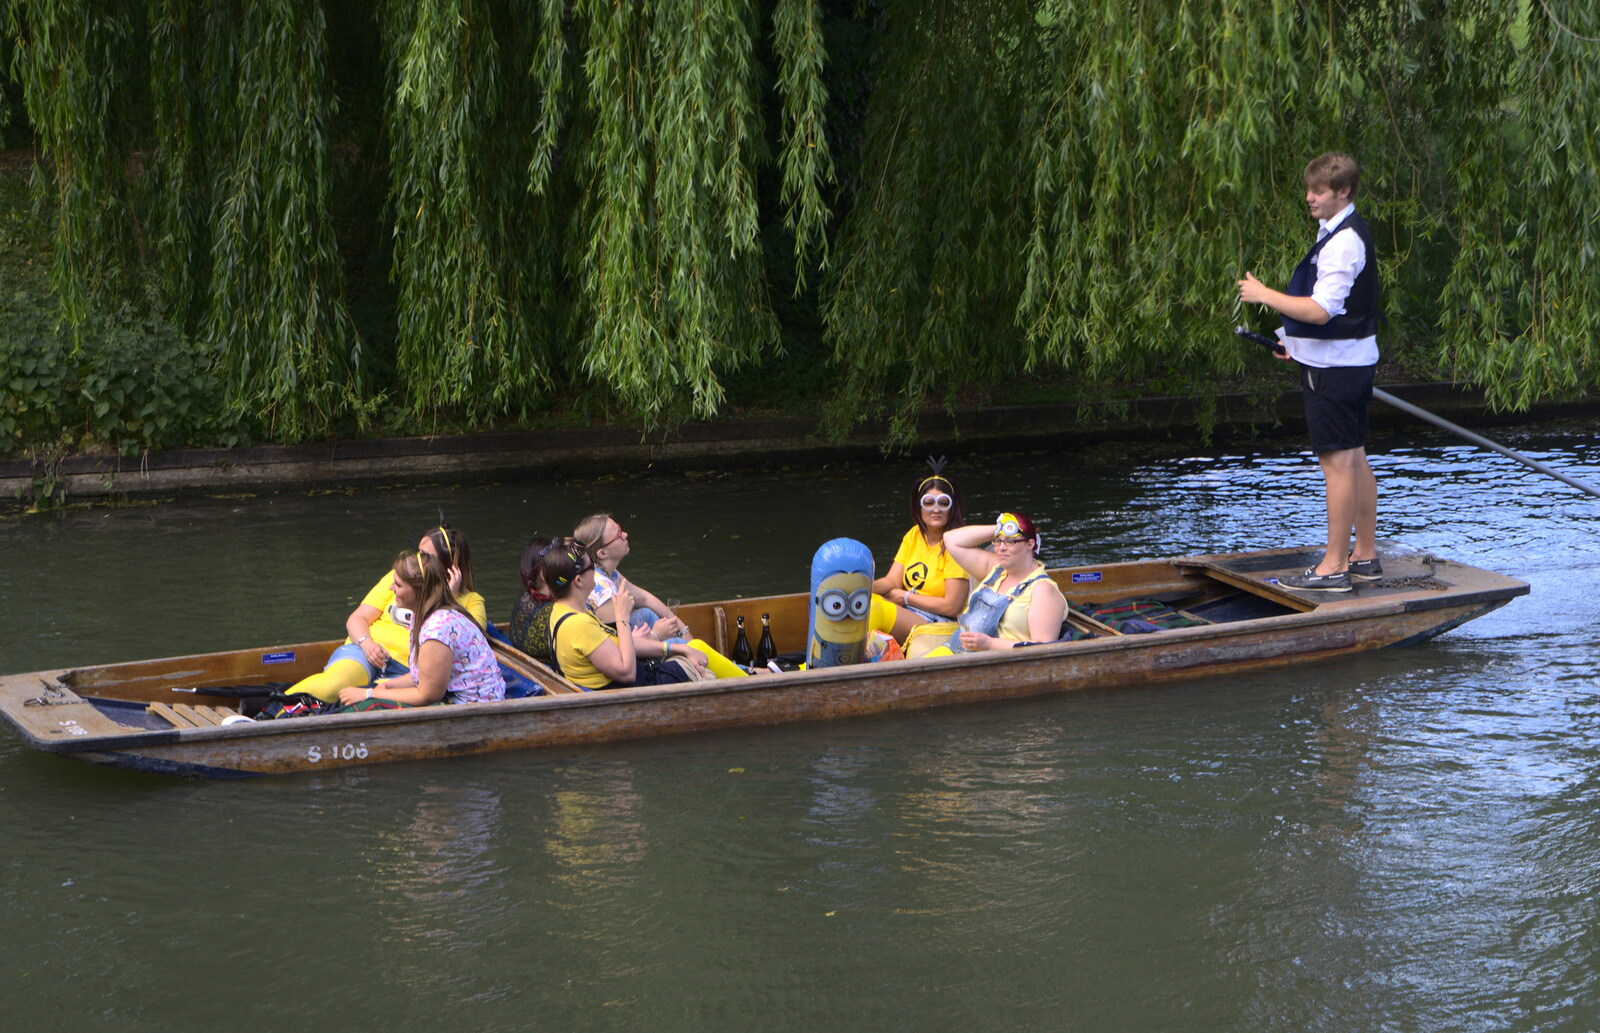 A hen party with Minion inflatable from Punting With Grandad, Cambridge, Cambridgeshire - 6th June 2015